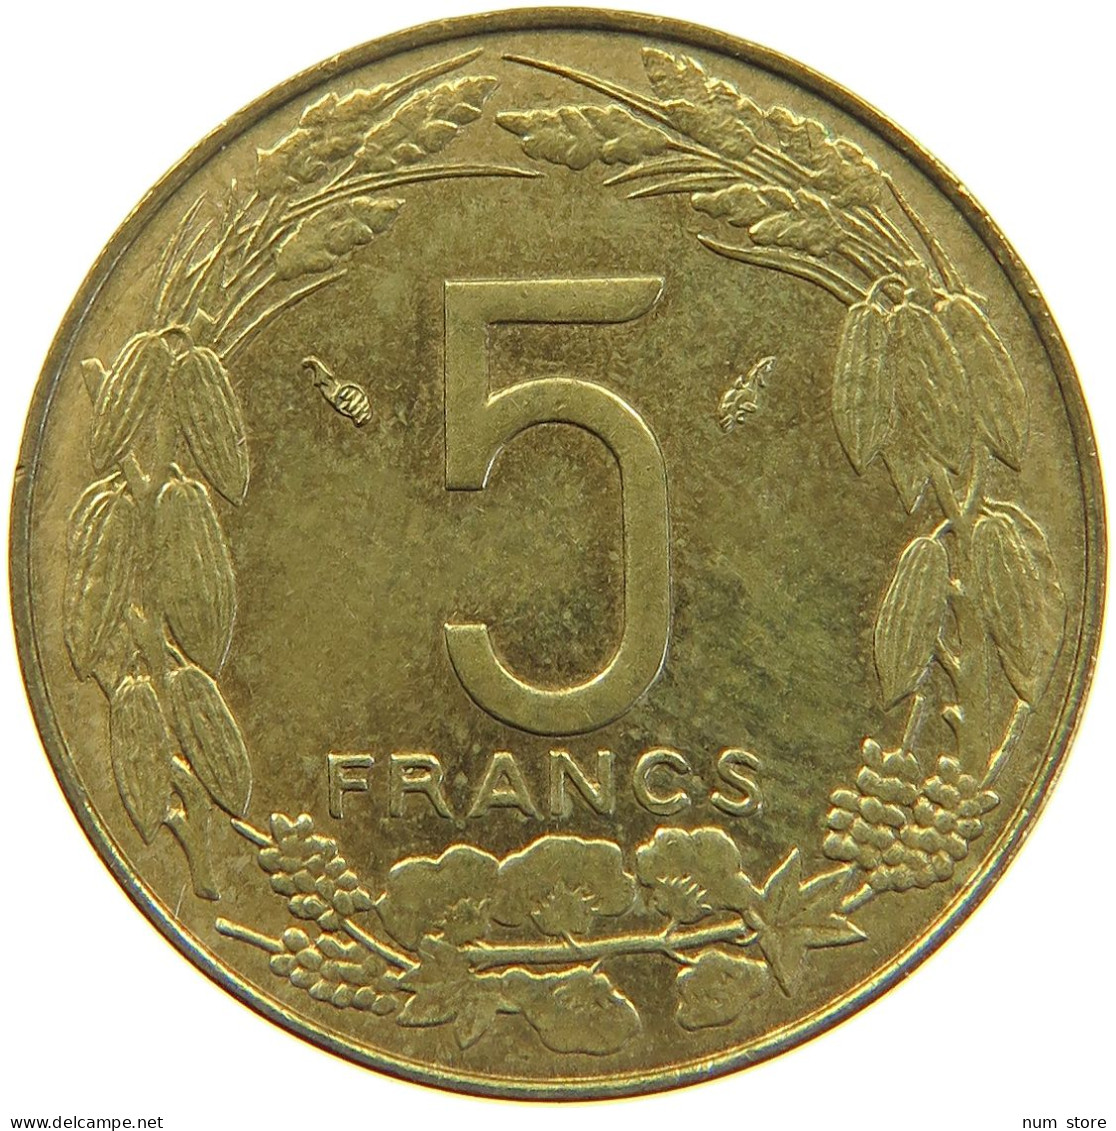 CENTRAL AFRICAN STATES 5 FRANCS 1975  #c016 0161 - Centraal-Afrikaanse Republiek